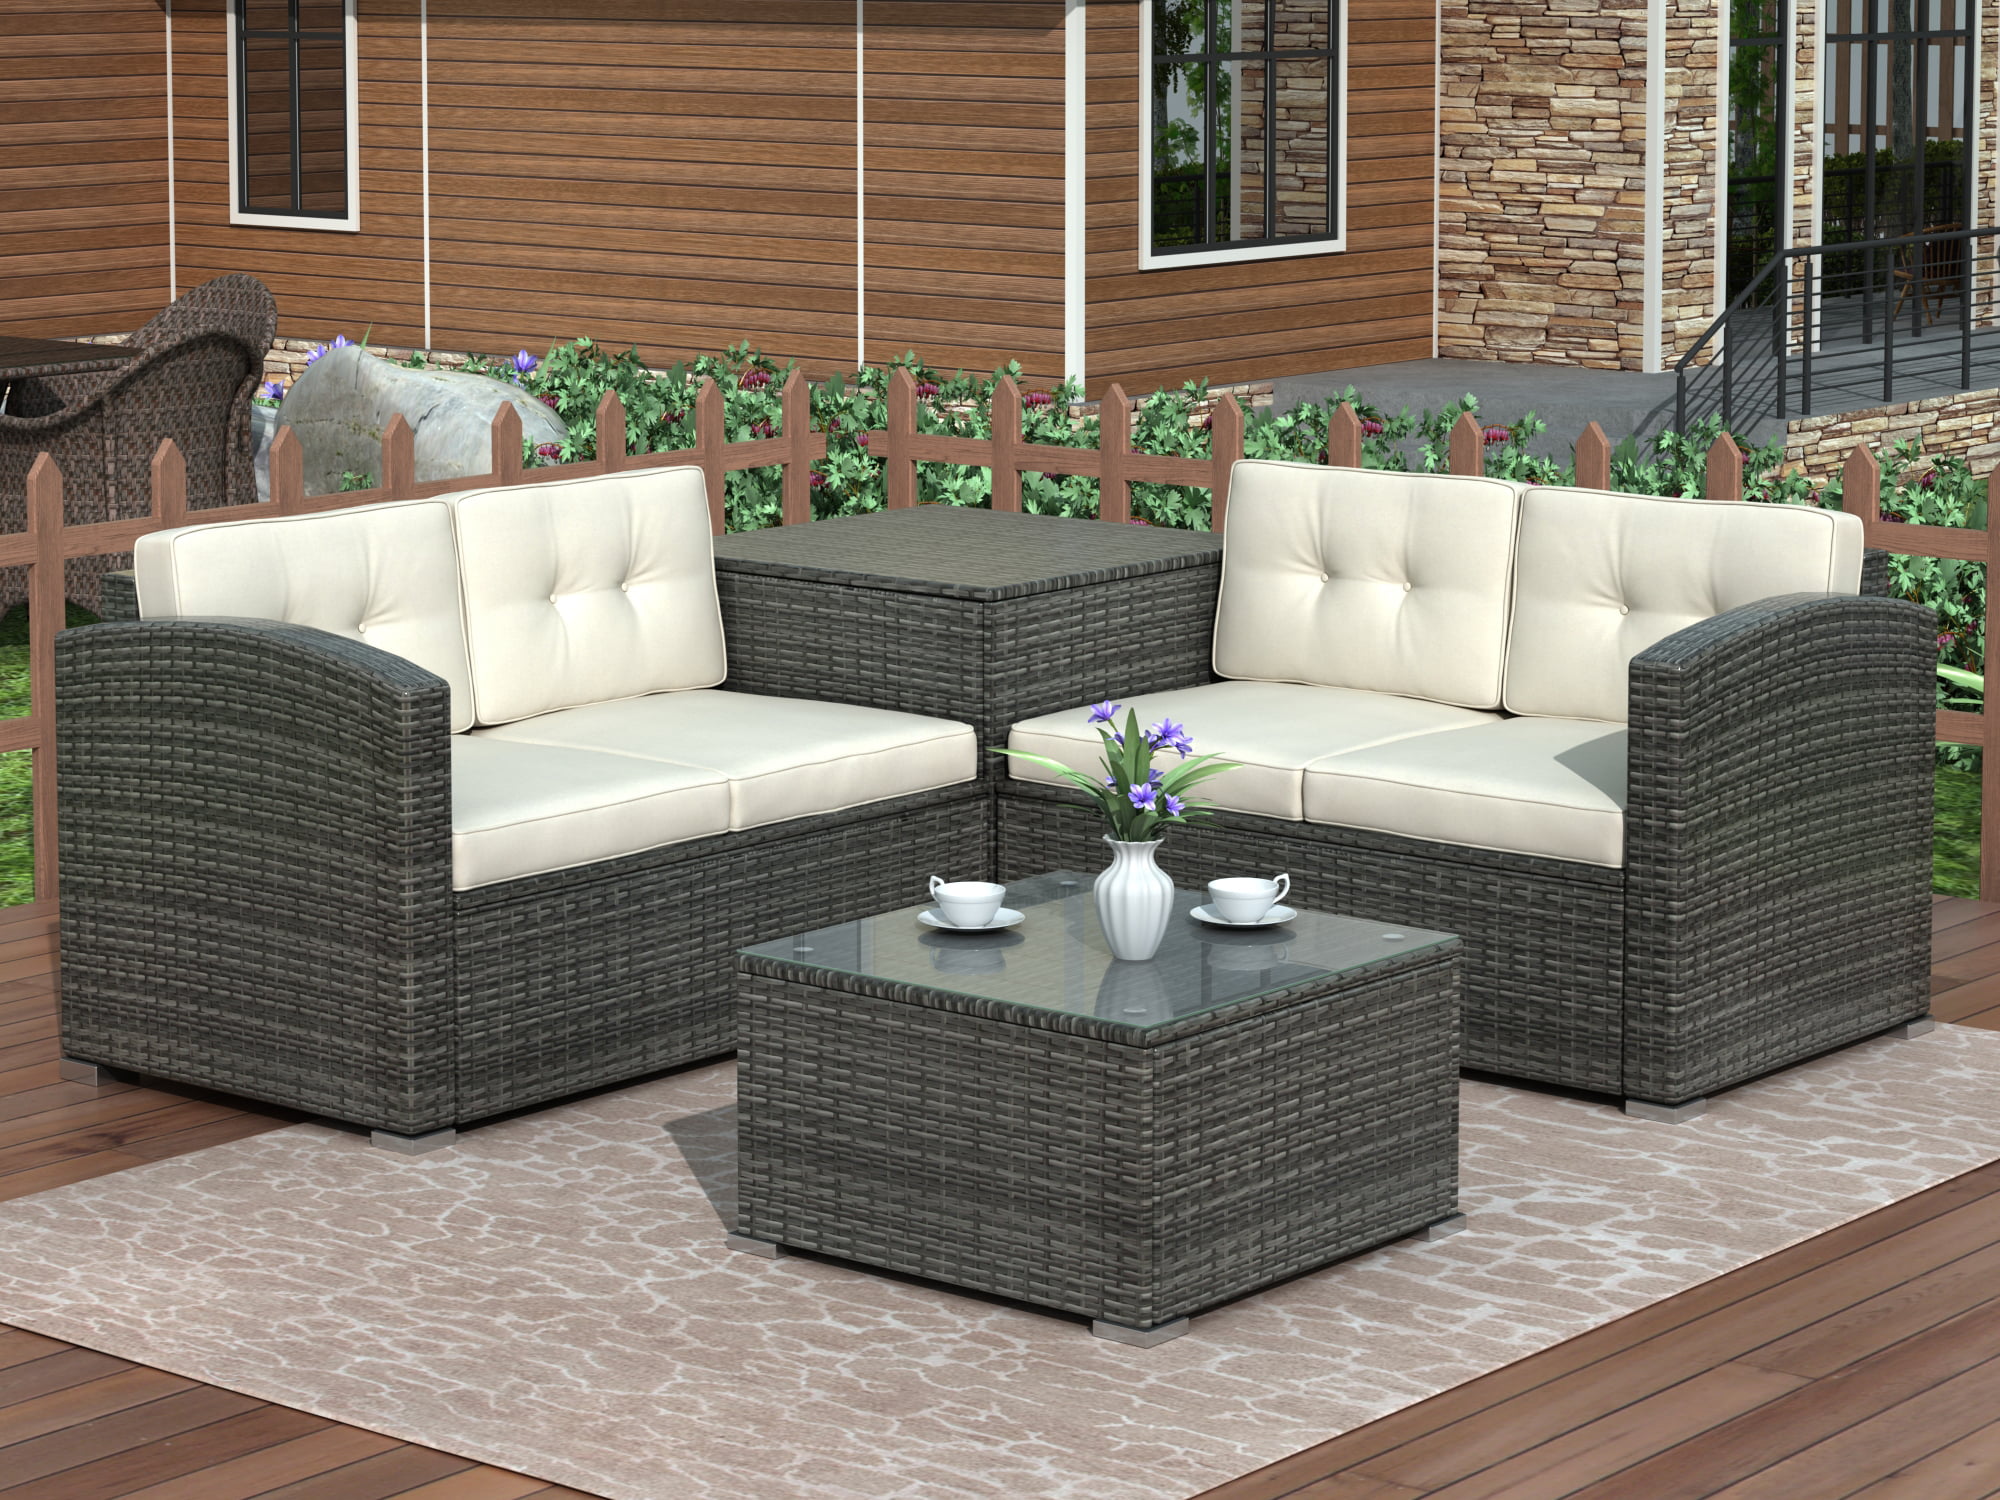 Outsunny Brown 4-Piece Iron Plastic Rattan Patio Furniture Set with Beige Cushions, 2-Single Chairs, Double Sofa and Tea Table-860-117BG - The Home Depot